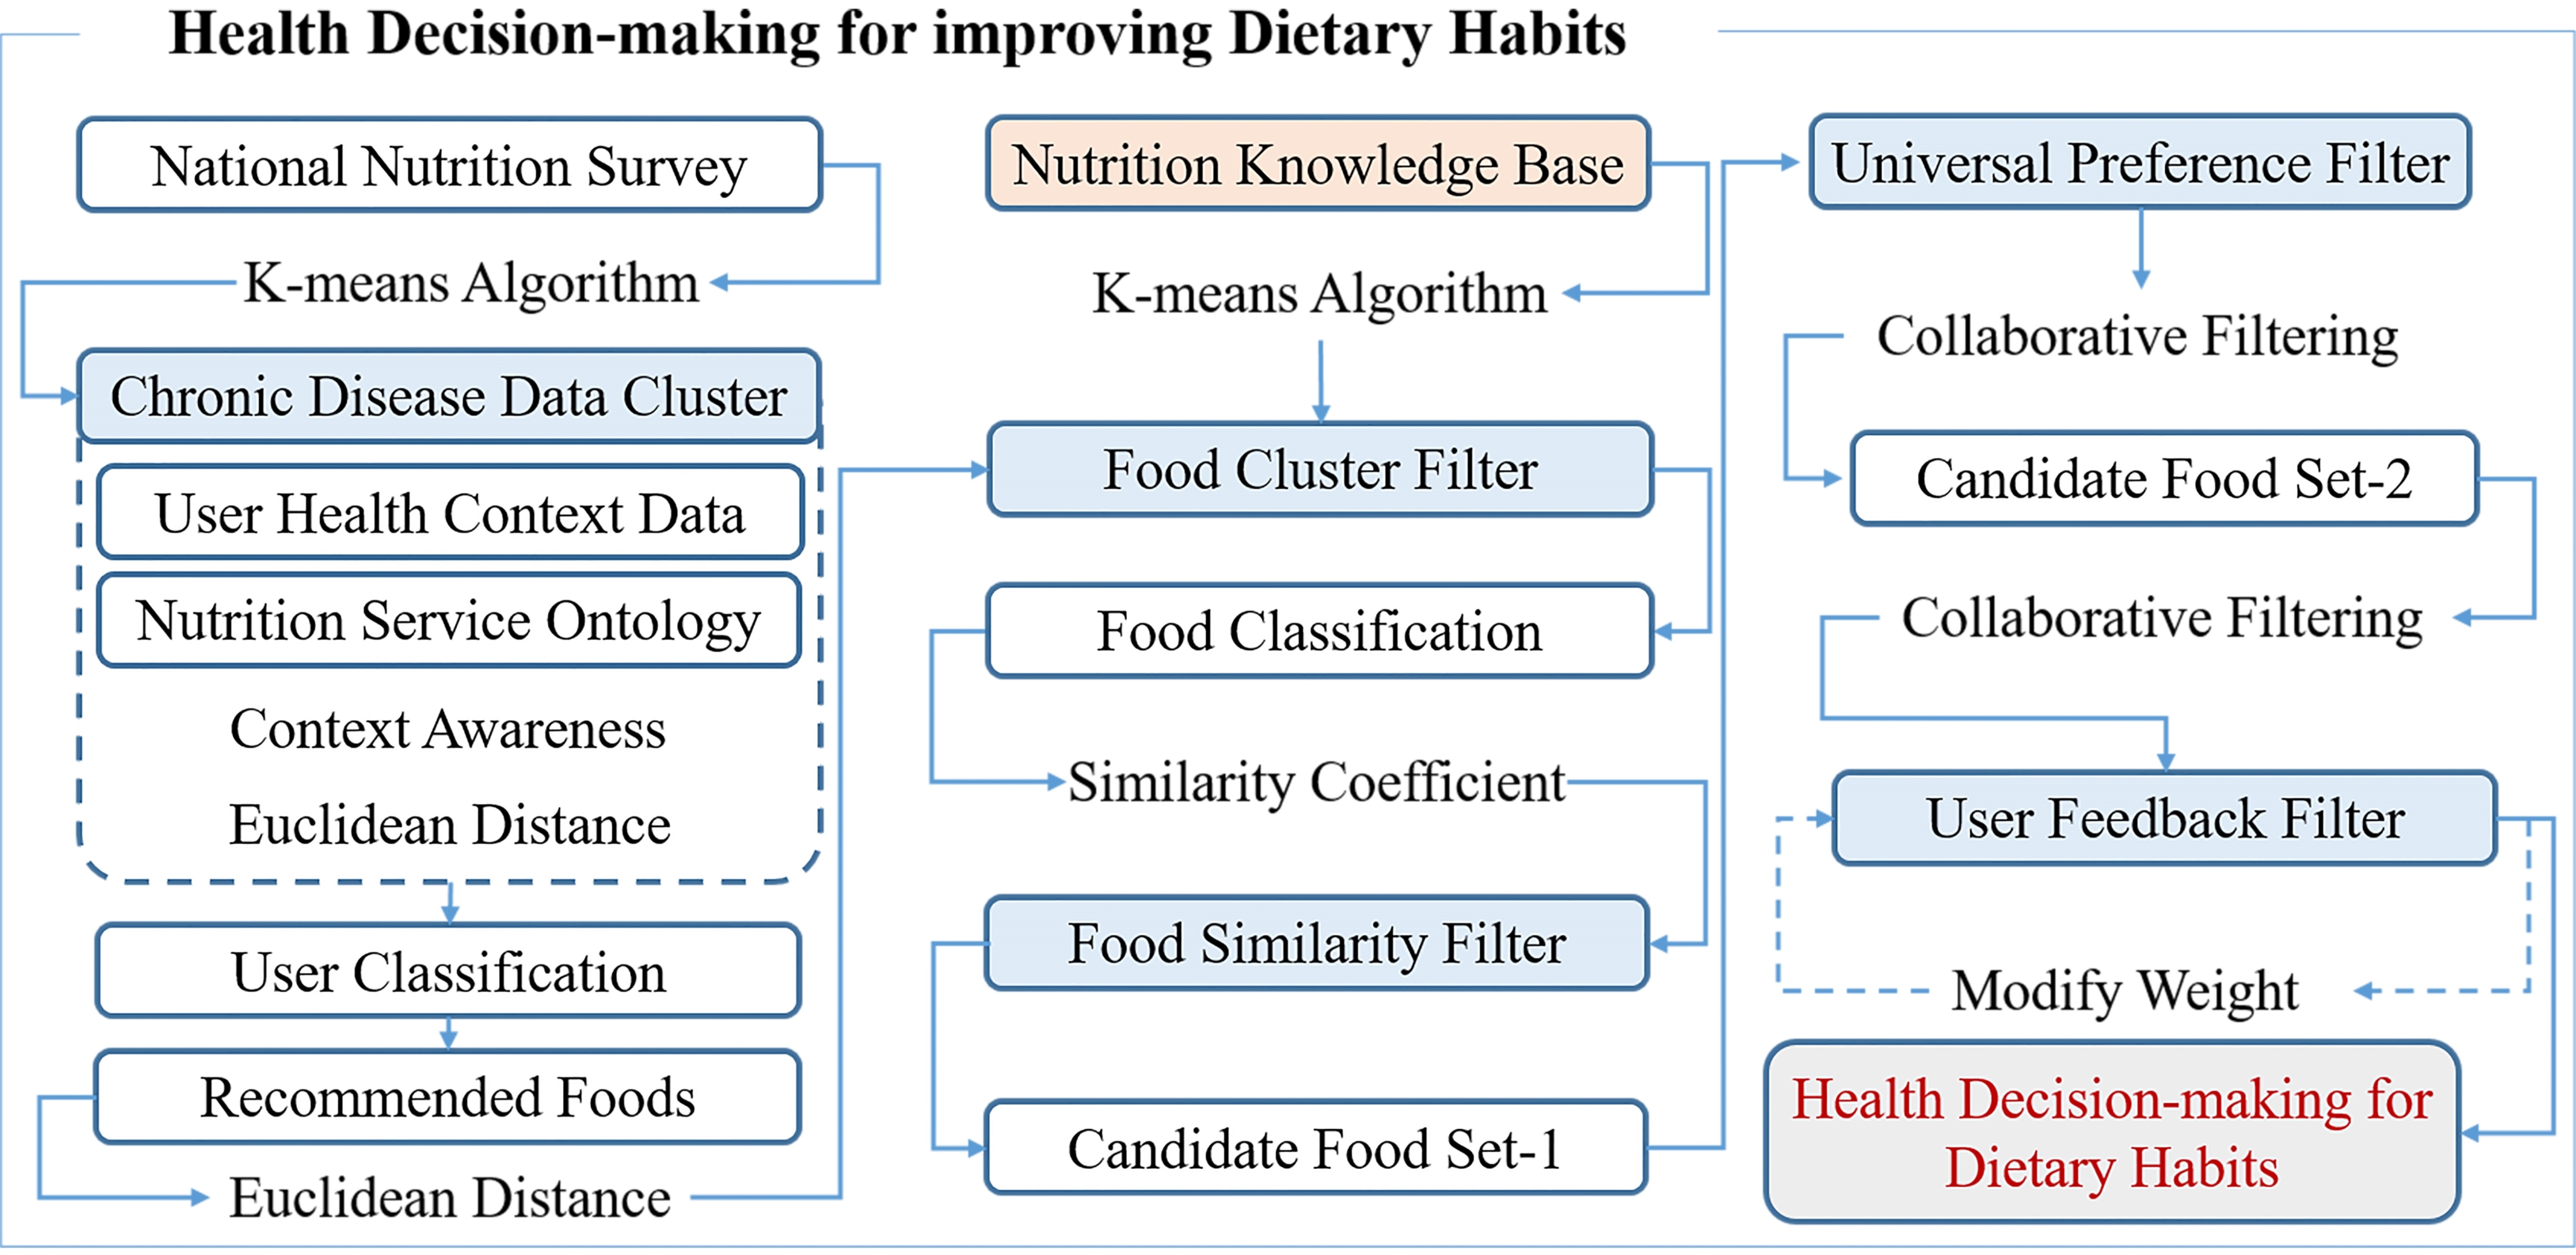 Hybrid clustering based health decision-making for improving dietary habits.